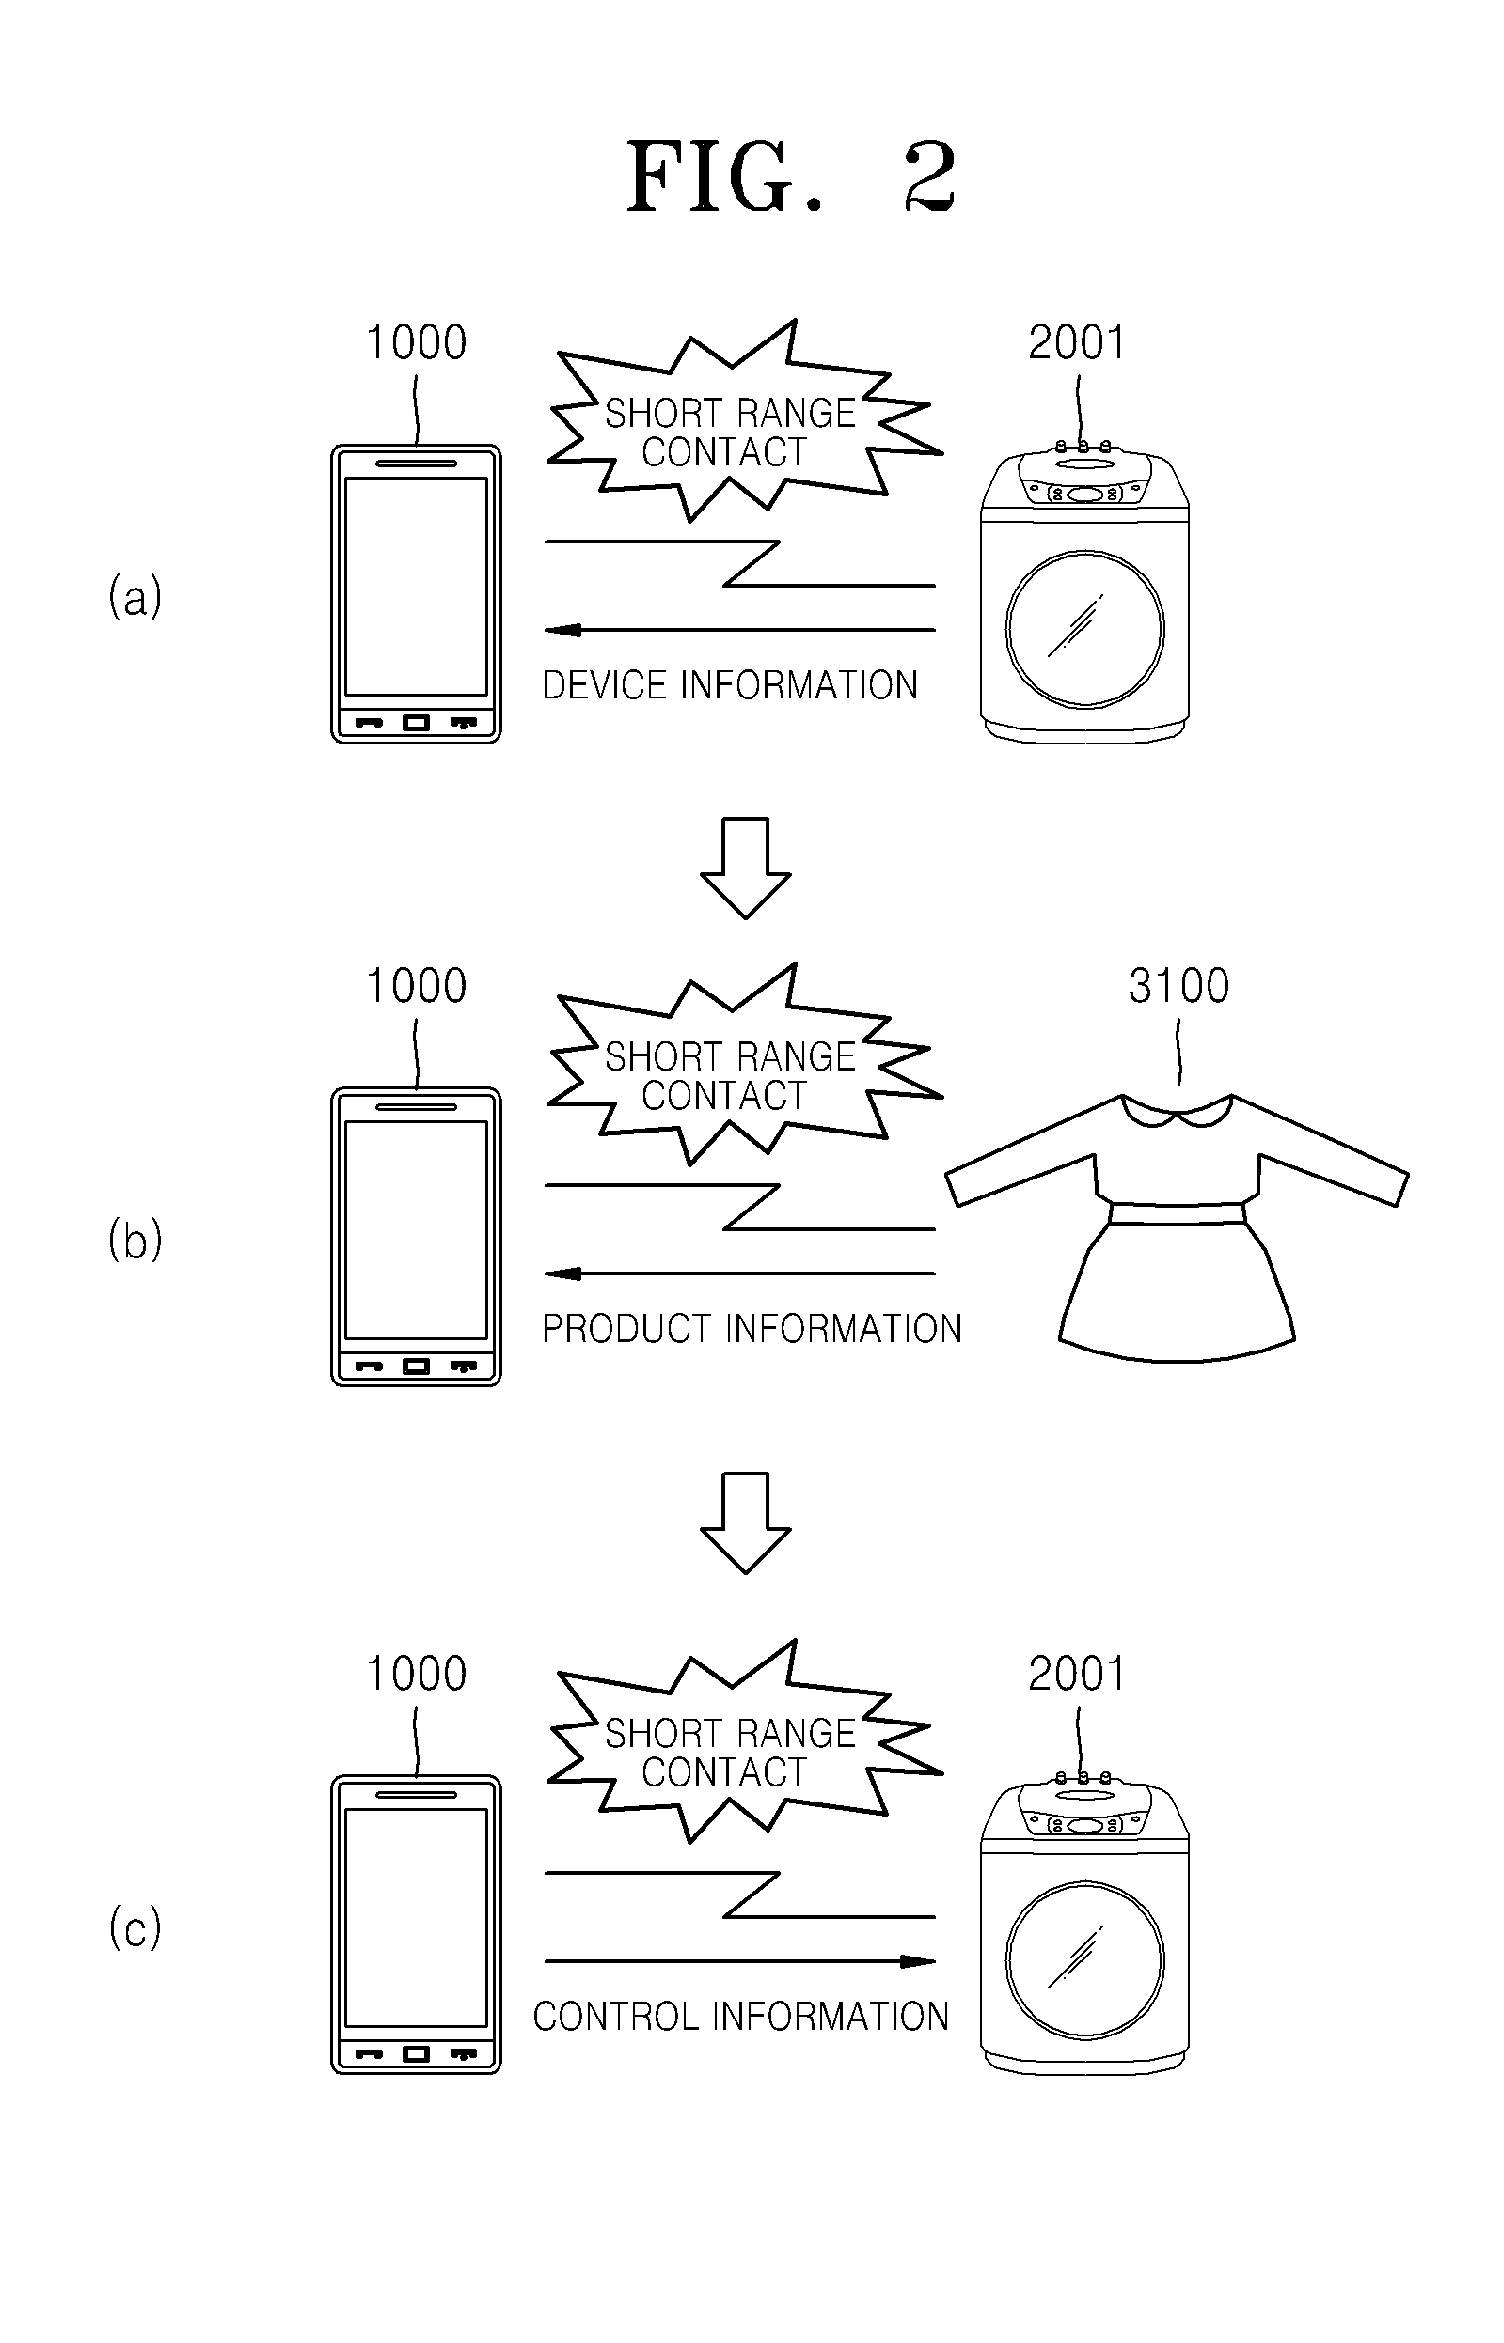 System and method of providing control information to device regarding product